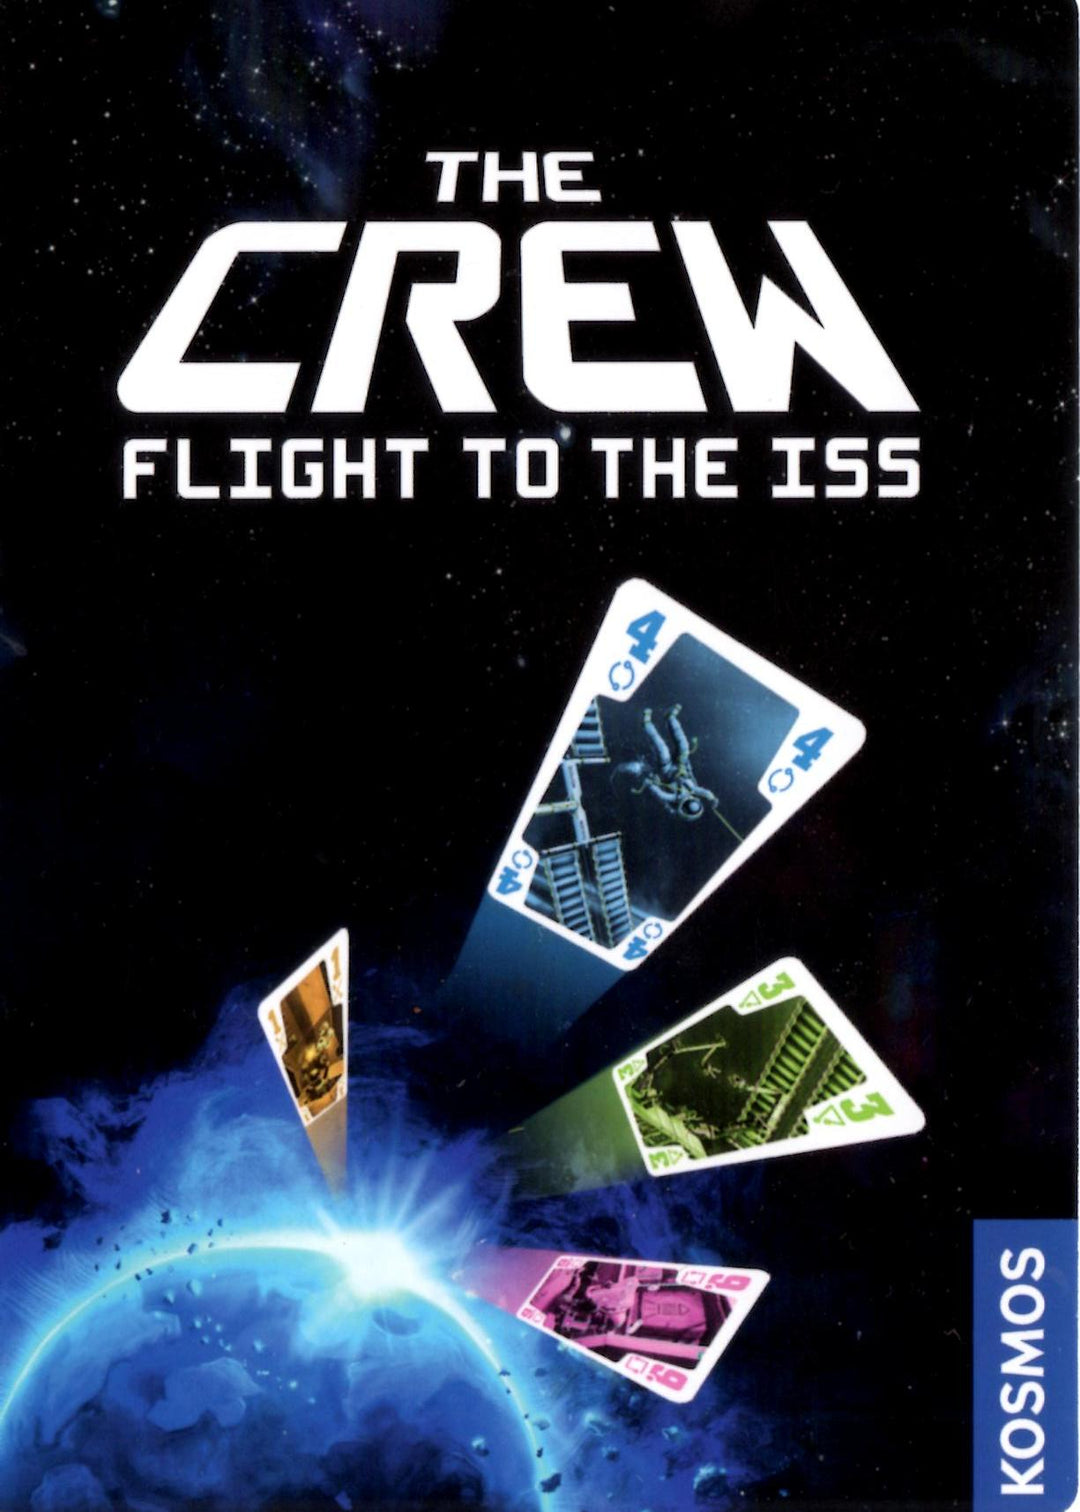 Crew, Quest for Planet Nine, The: Flight to the ISS Promo for use with the board game C, Crew, sold at the BoardGameGeek Store